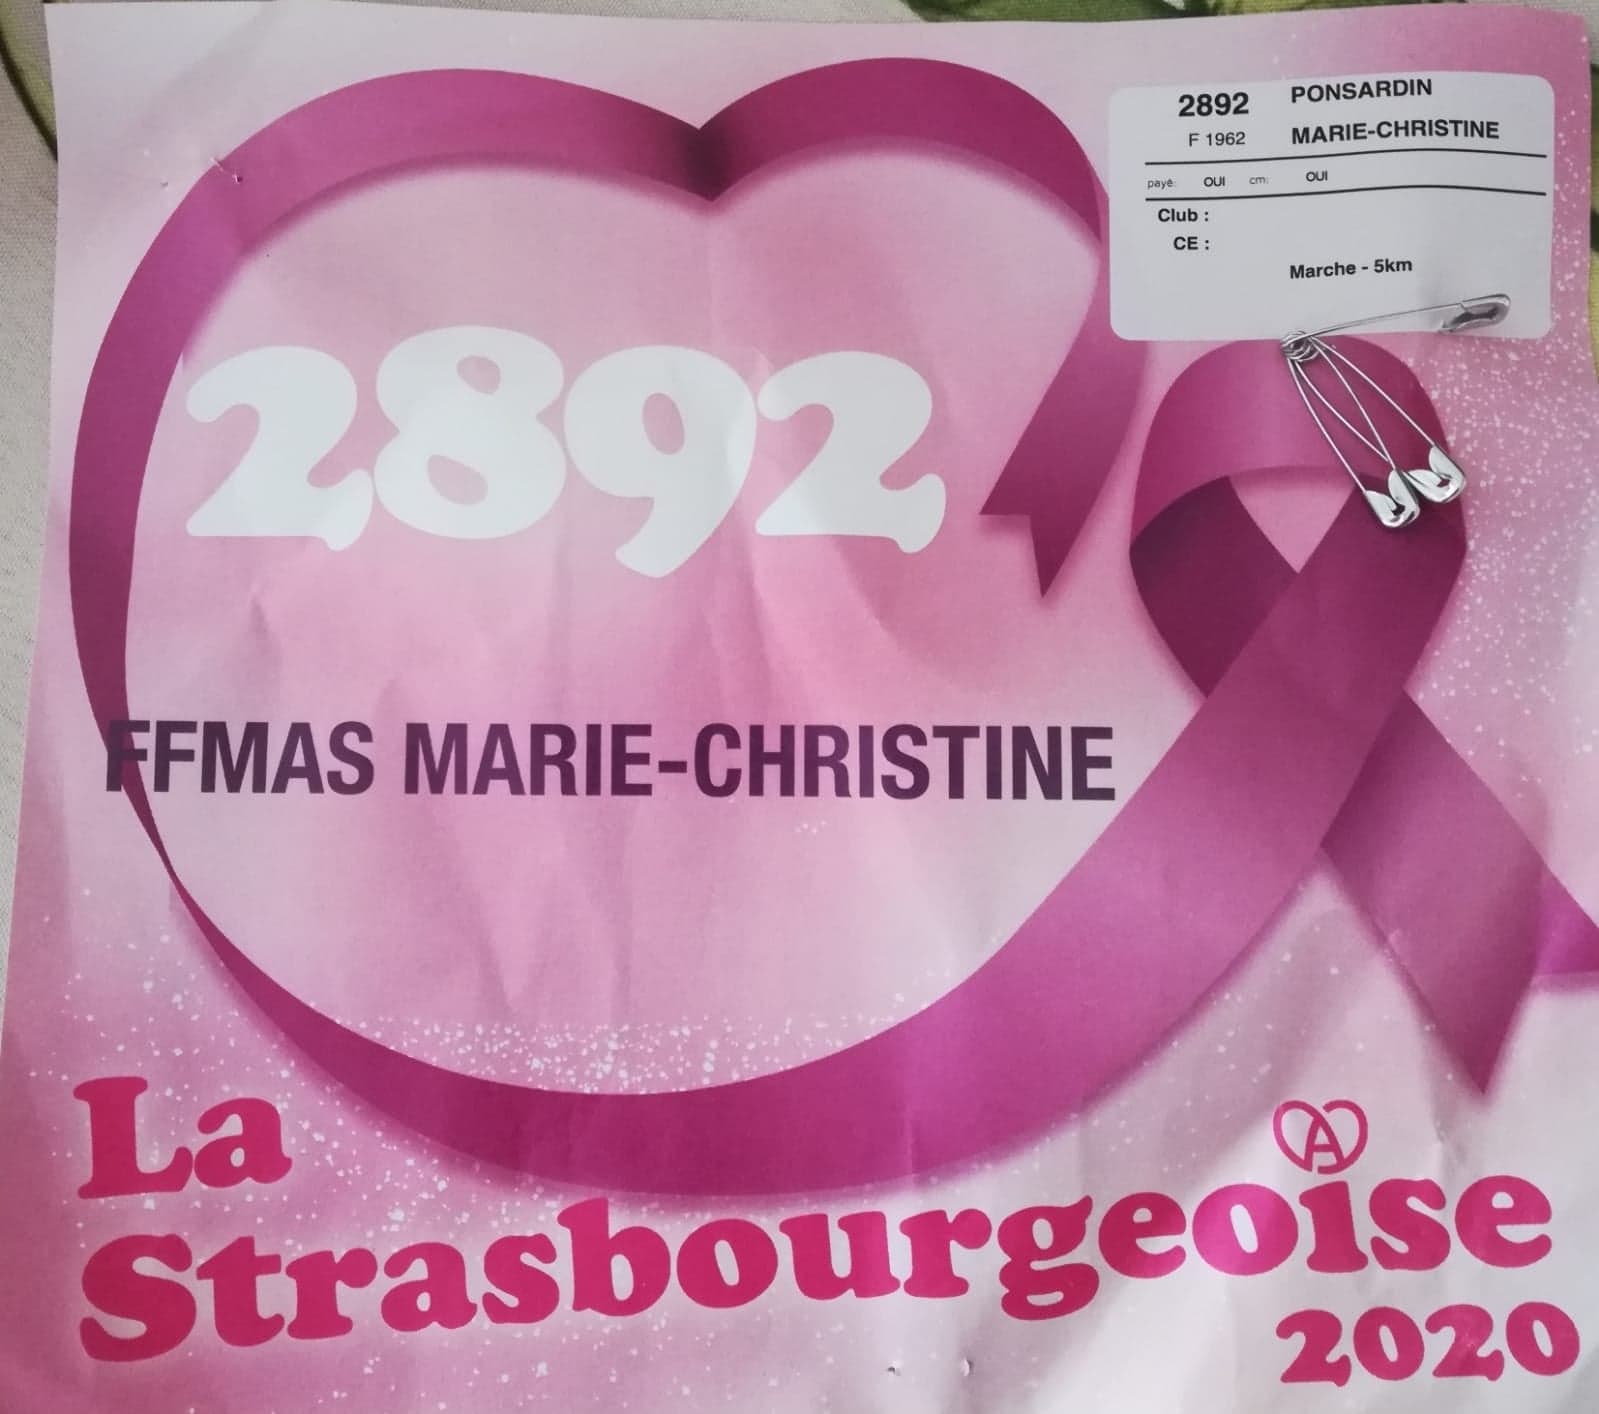 You are currently viewing La Strasbourgeoise 2020 – Dimanche 04 octobre…